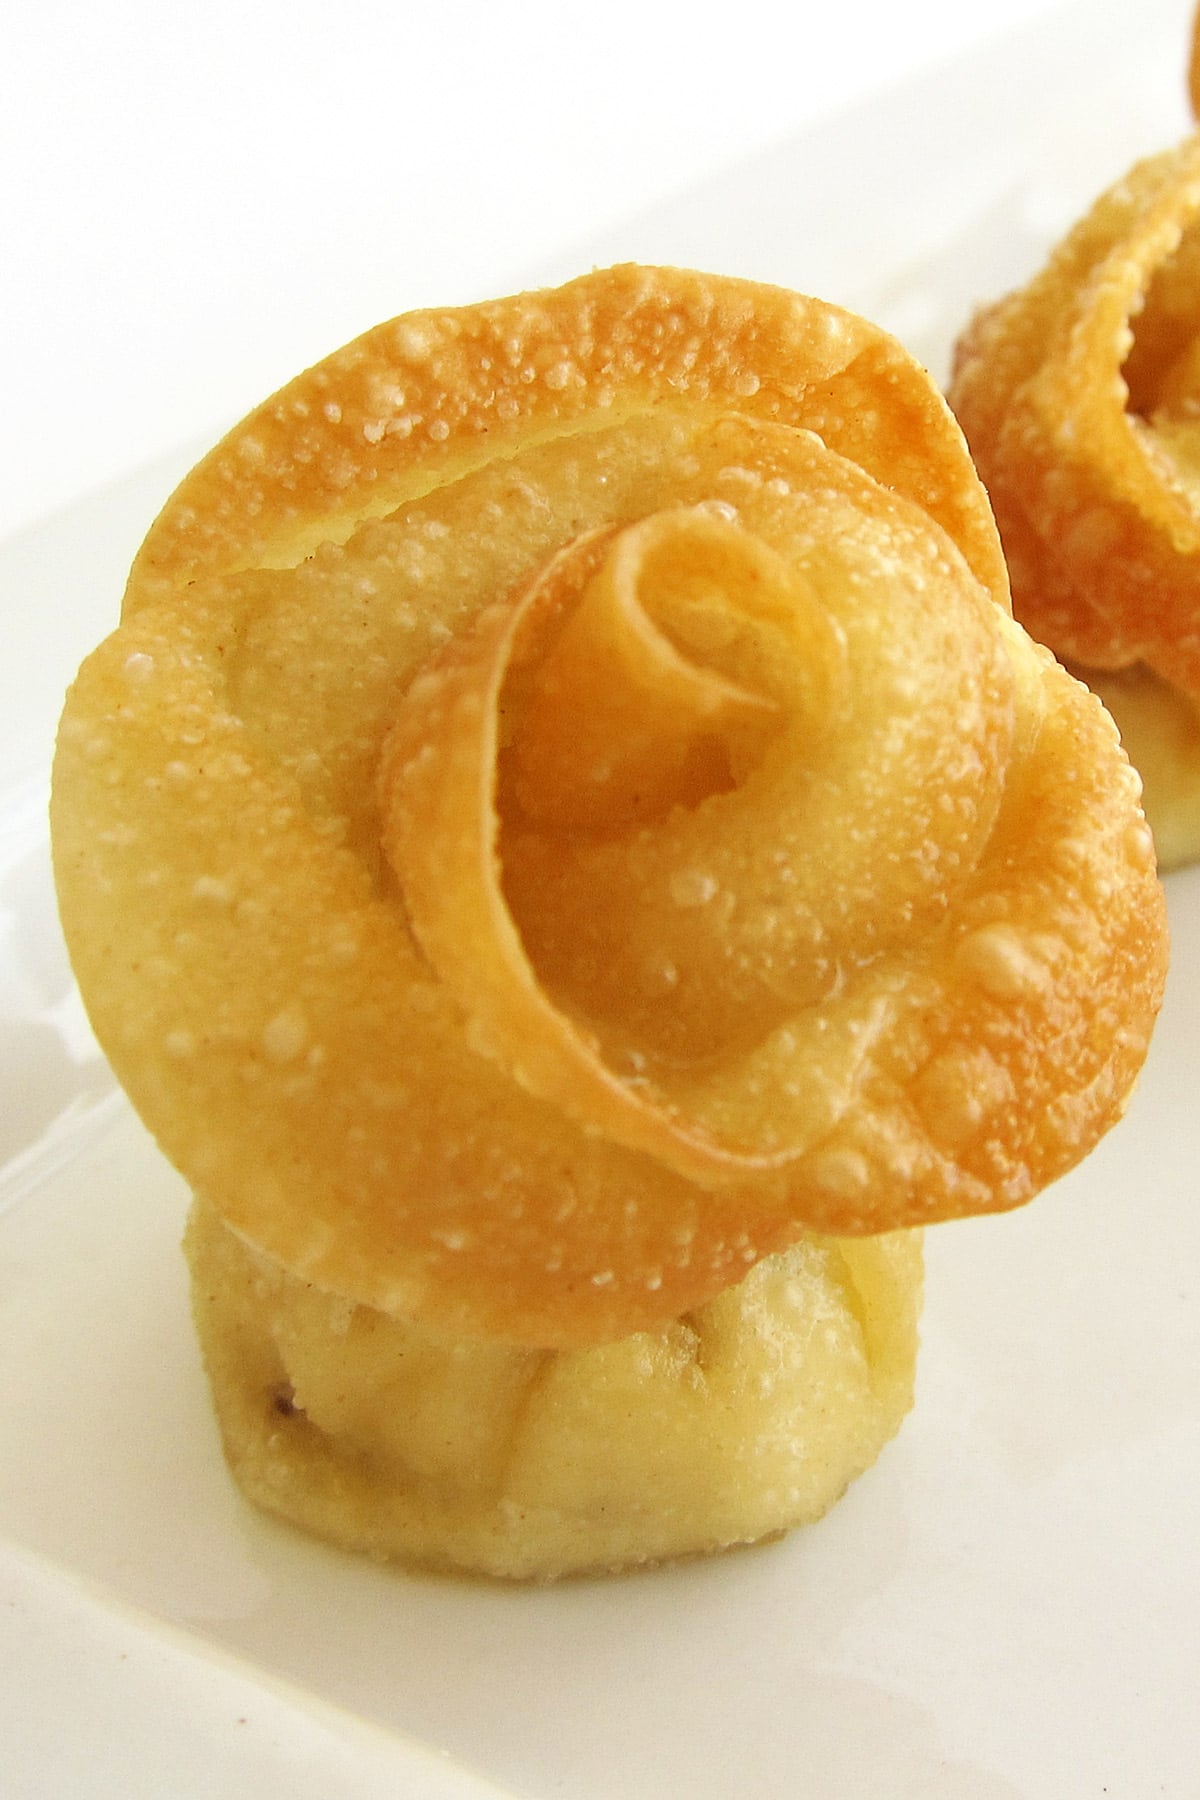 a fried won ton rose filled with flavored cream cheese served on a white appetizer platter.